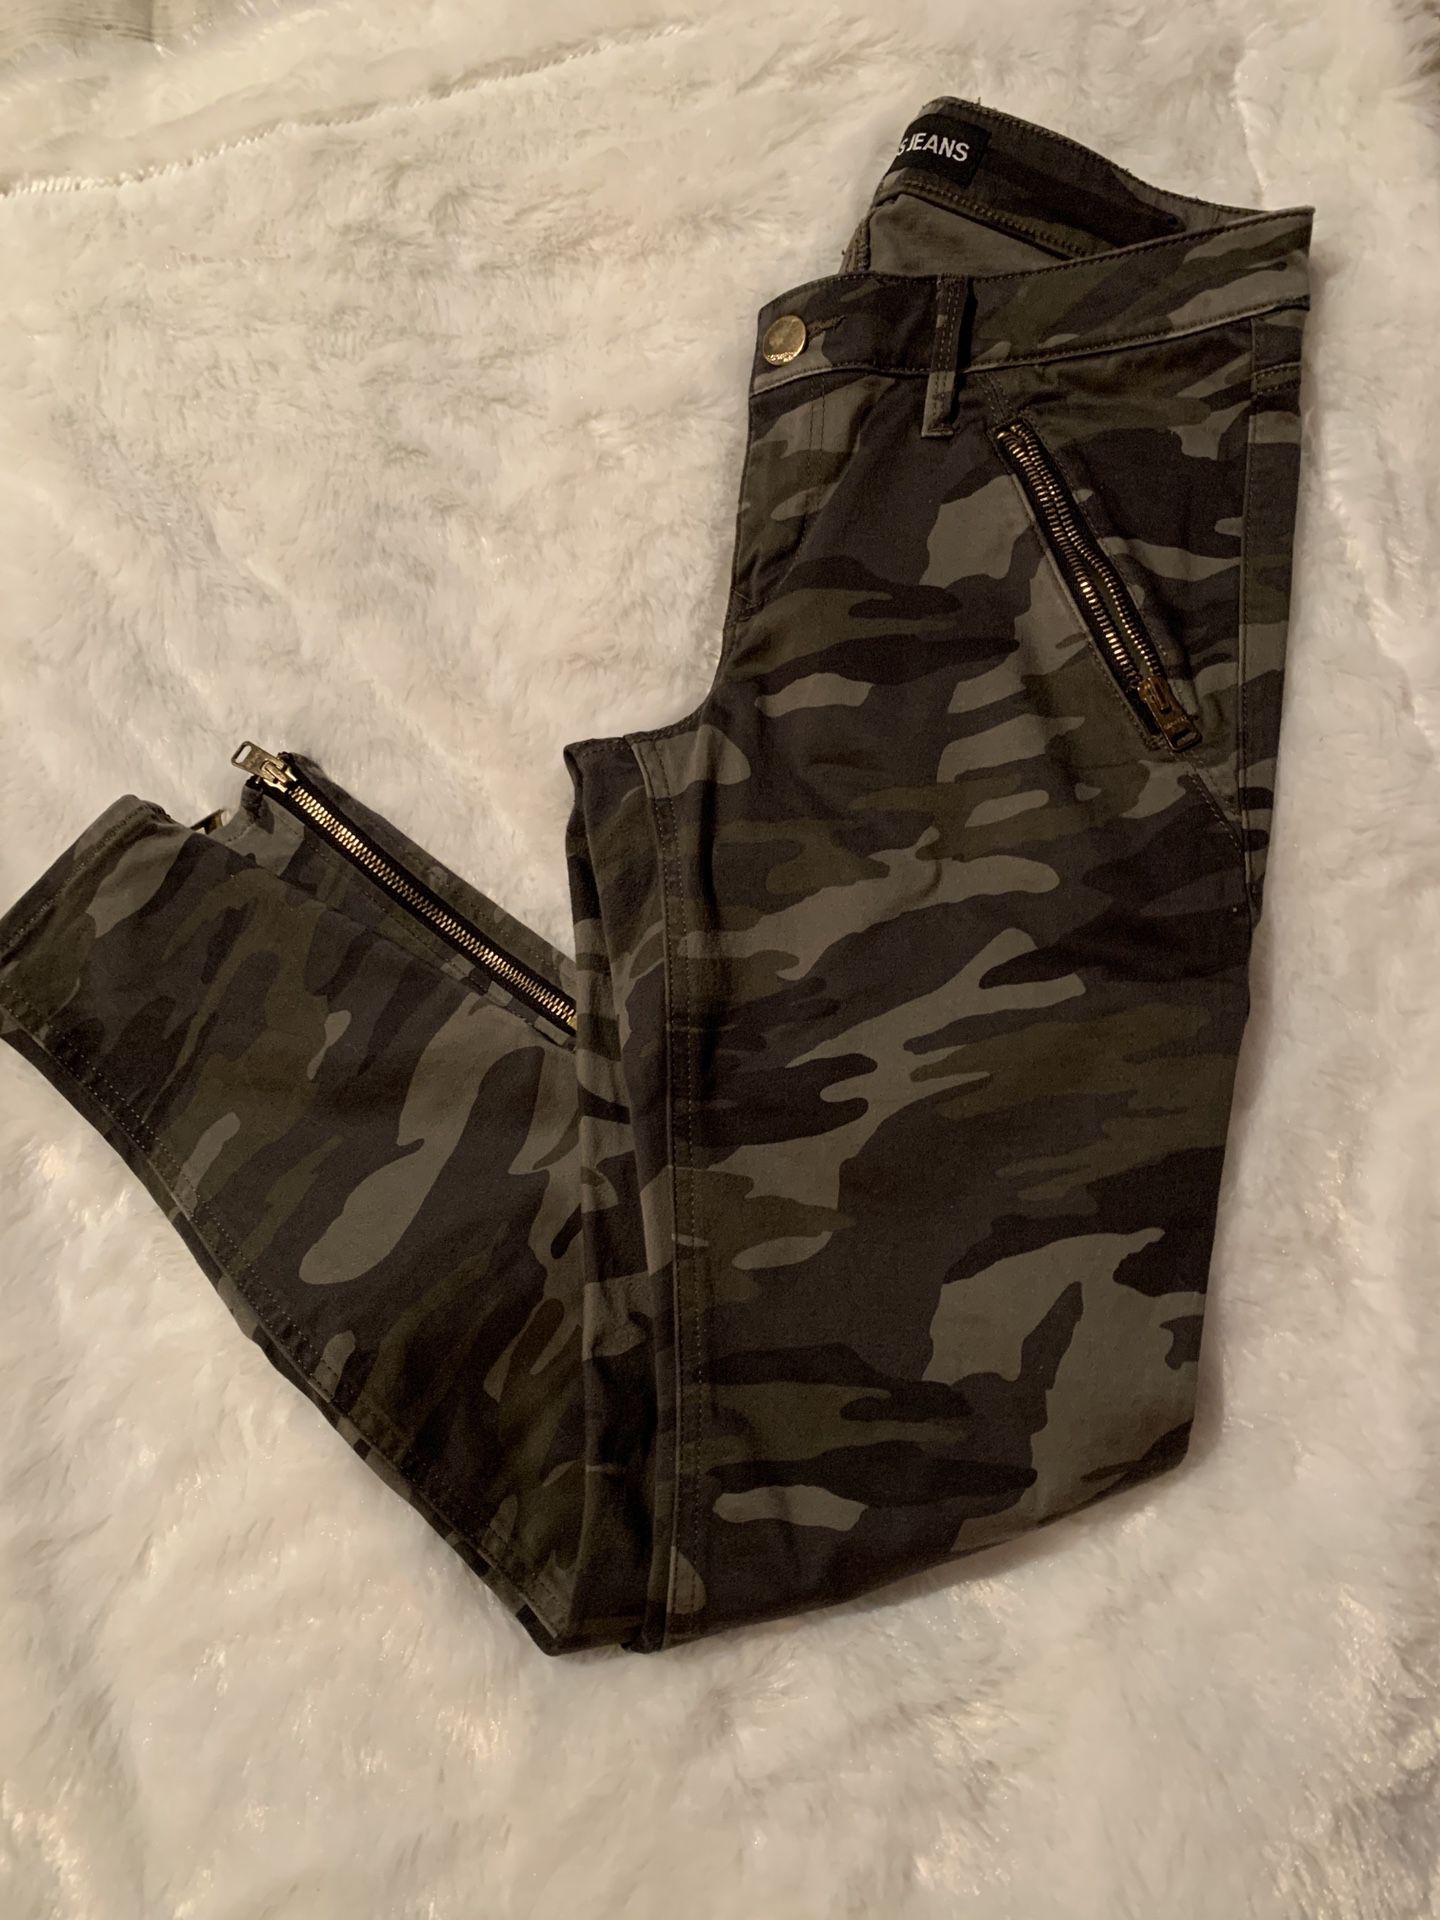 Express camo pants size 4 in great condition